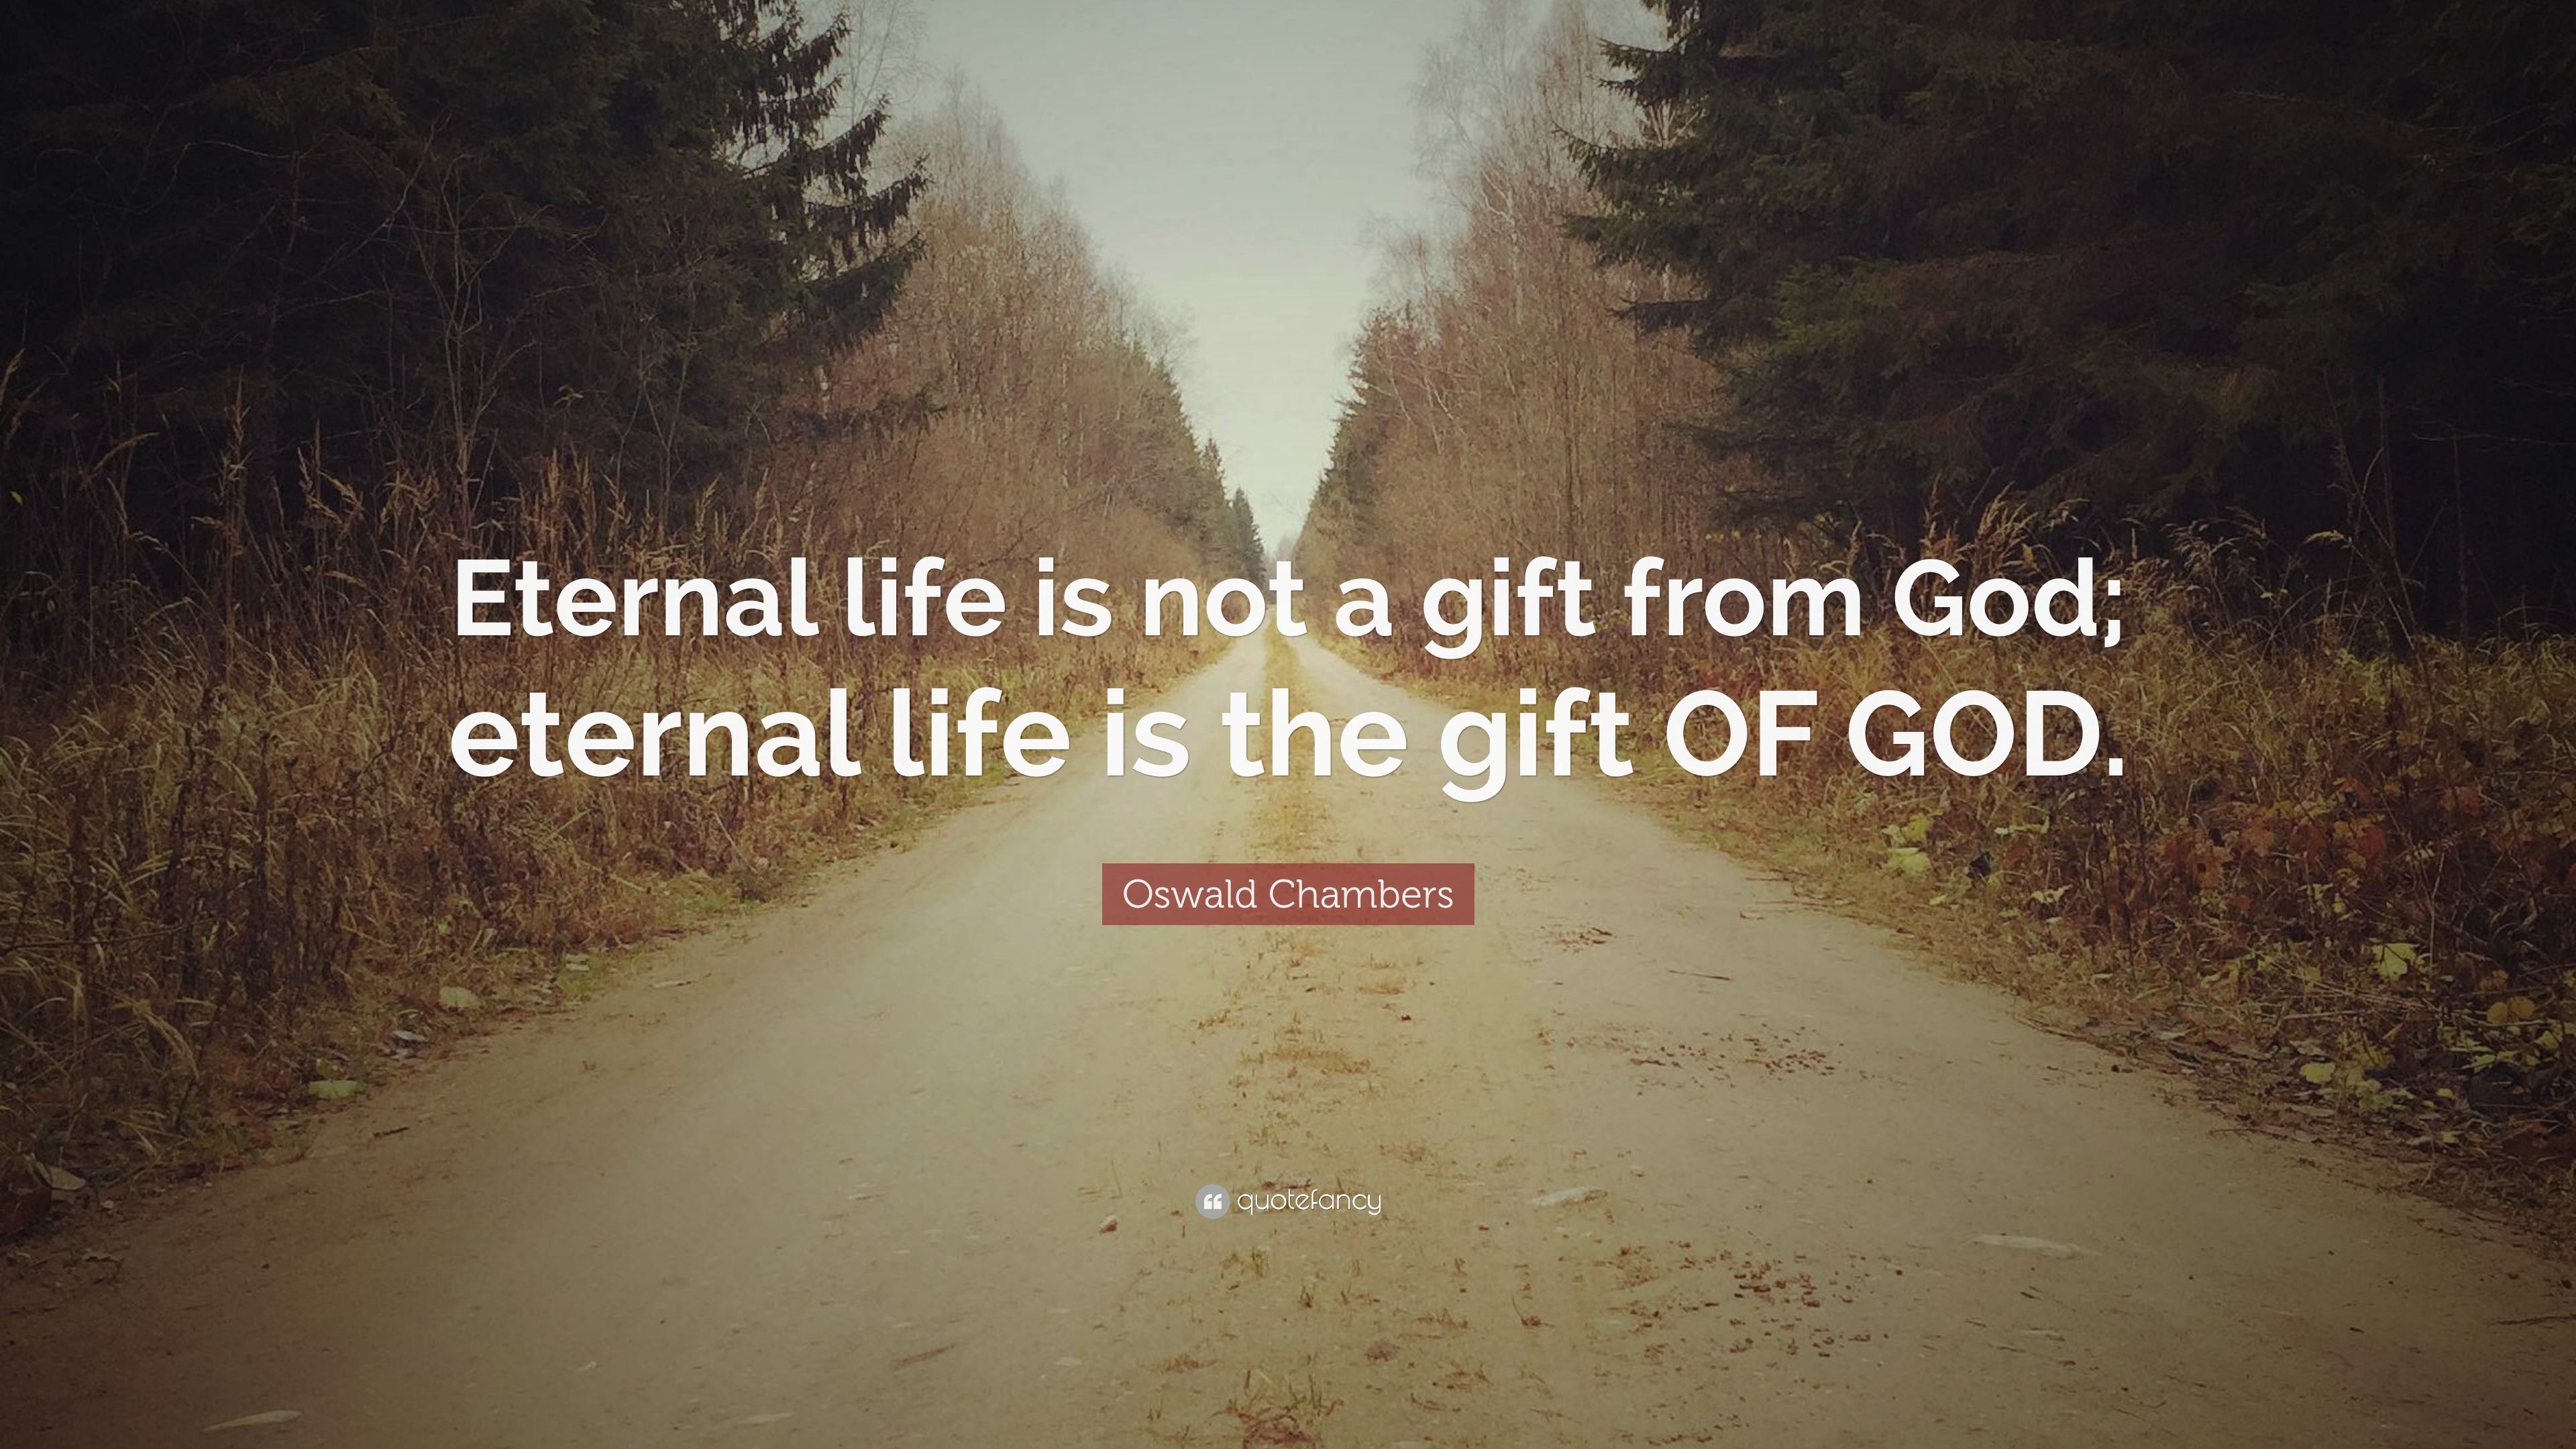 Oswald Chambers Quote: "Eternal life is not a gift from God; eternal life is the gift OF GOD ...